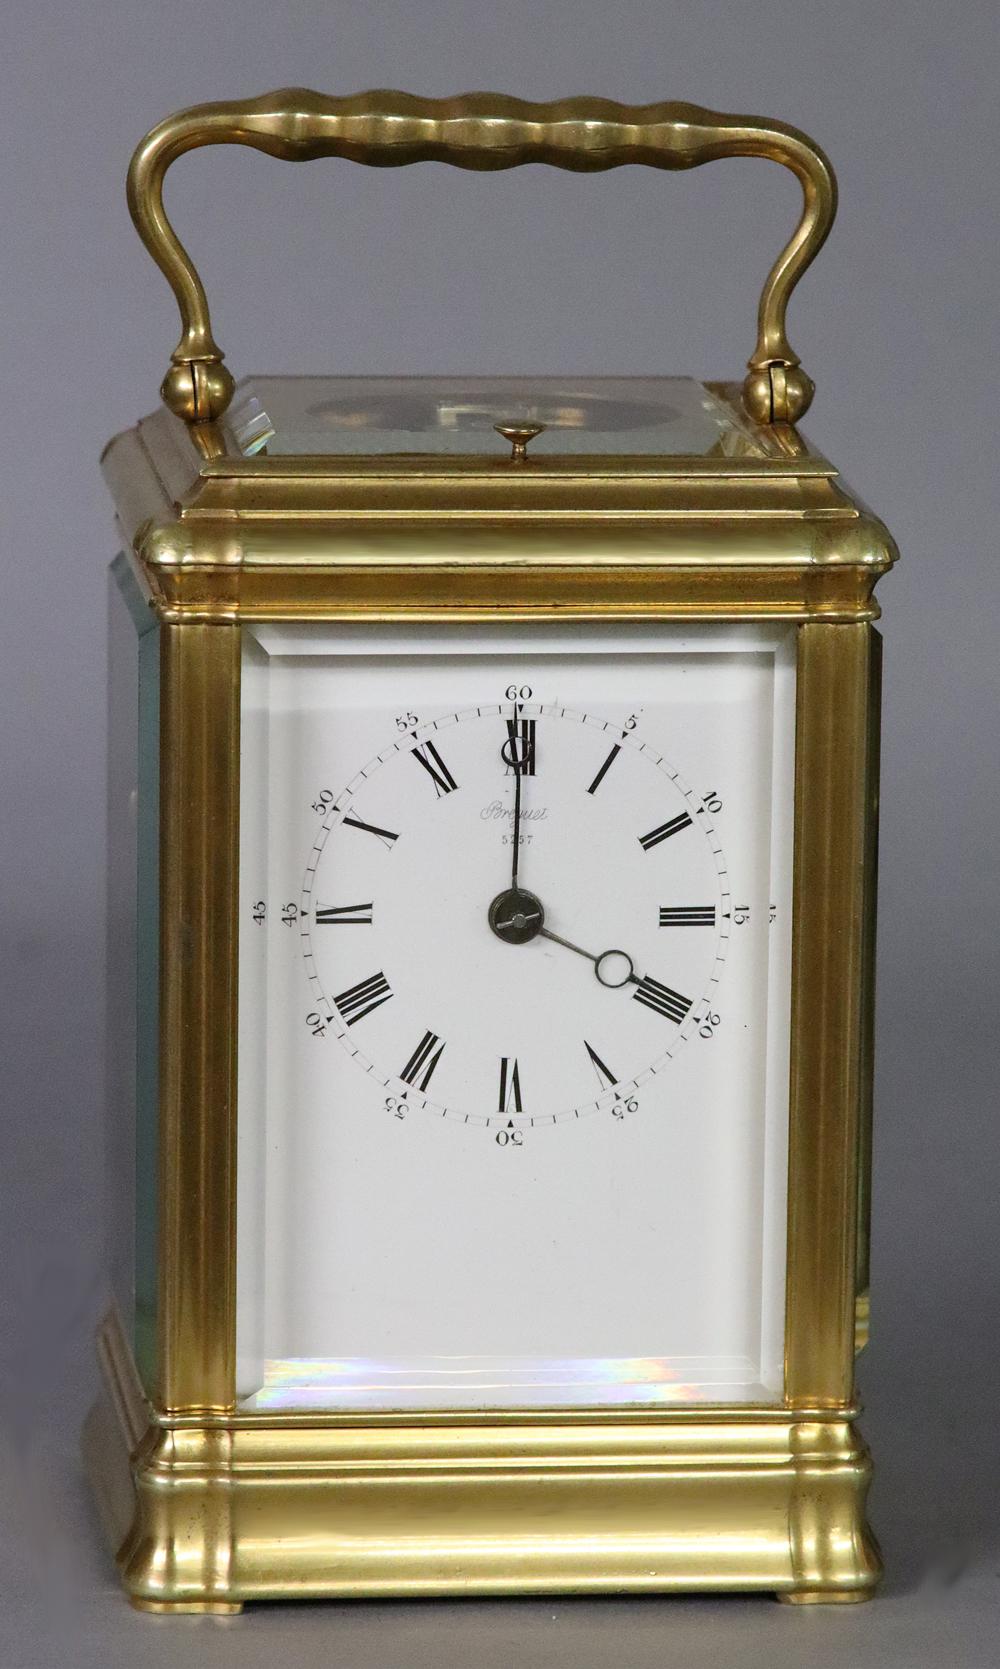 19th Century c.1876 French Quarter-Striking Carriage Clock by Breguet For Sale